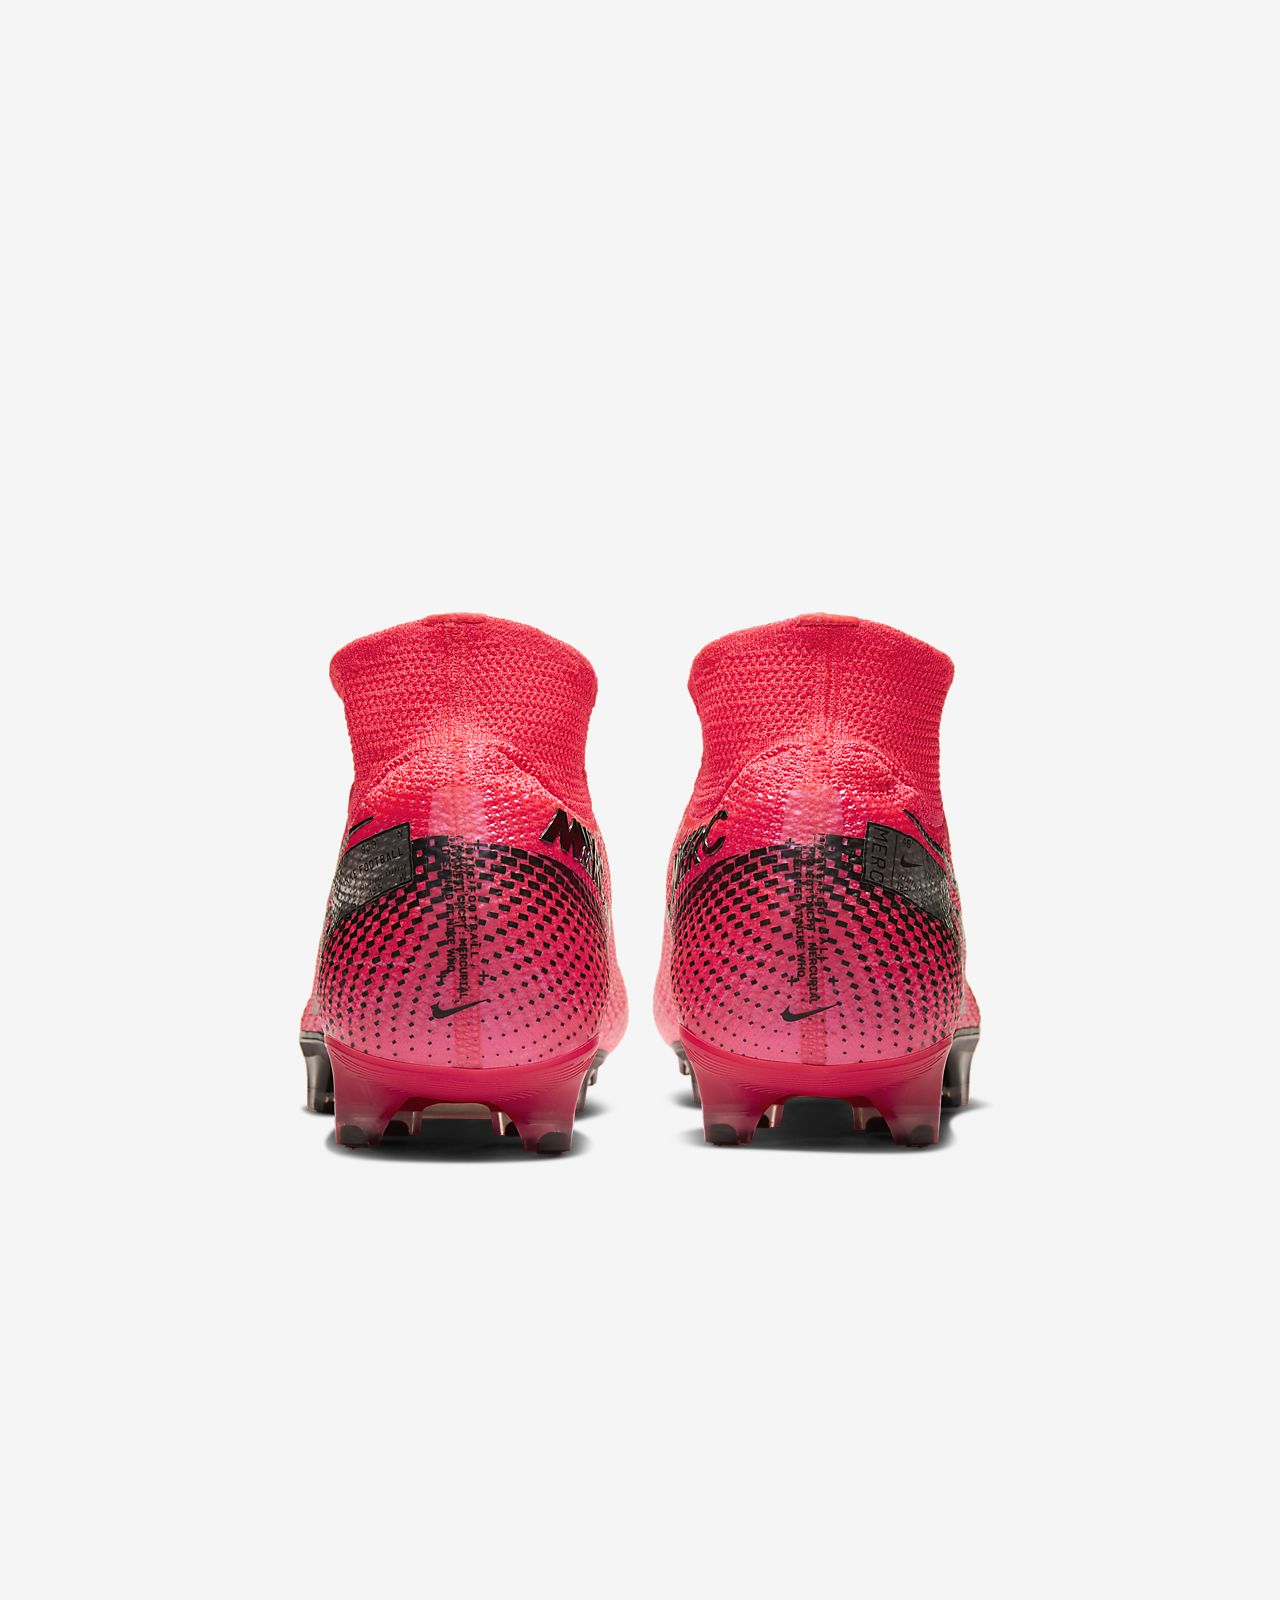 Details about Nike ACC Mercurial Superfly 7 Elite FG Soccer.